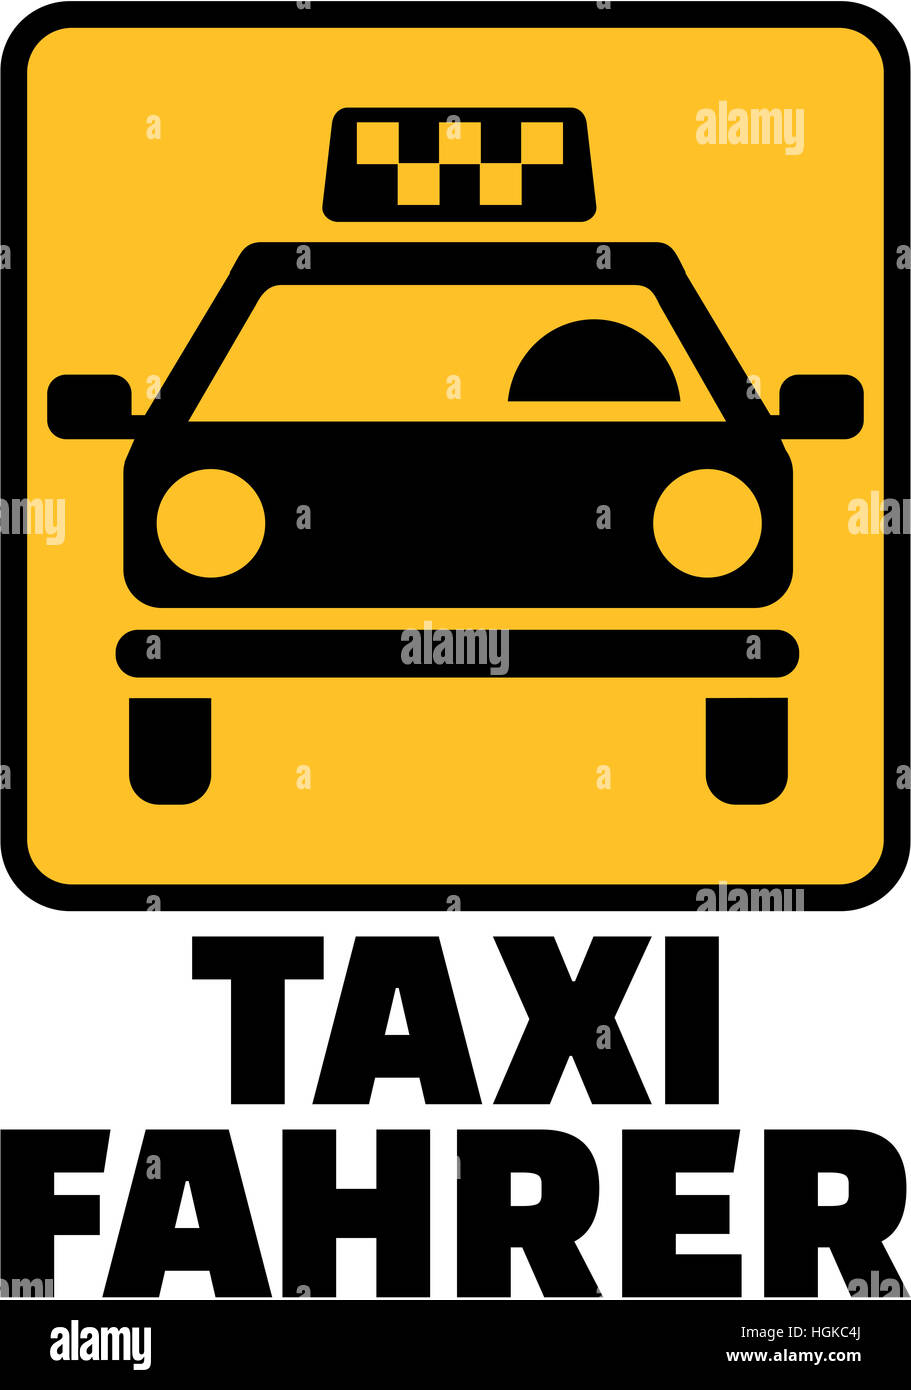 Yellow cab icon with german taxi driver job title Stock Photo